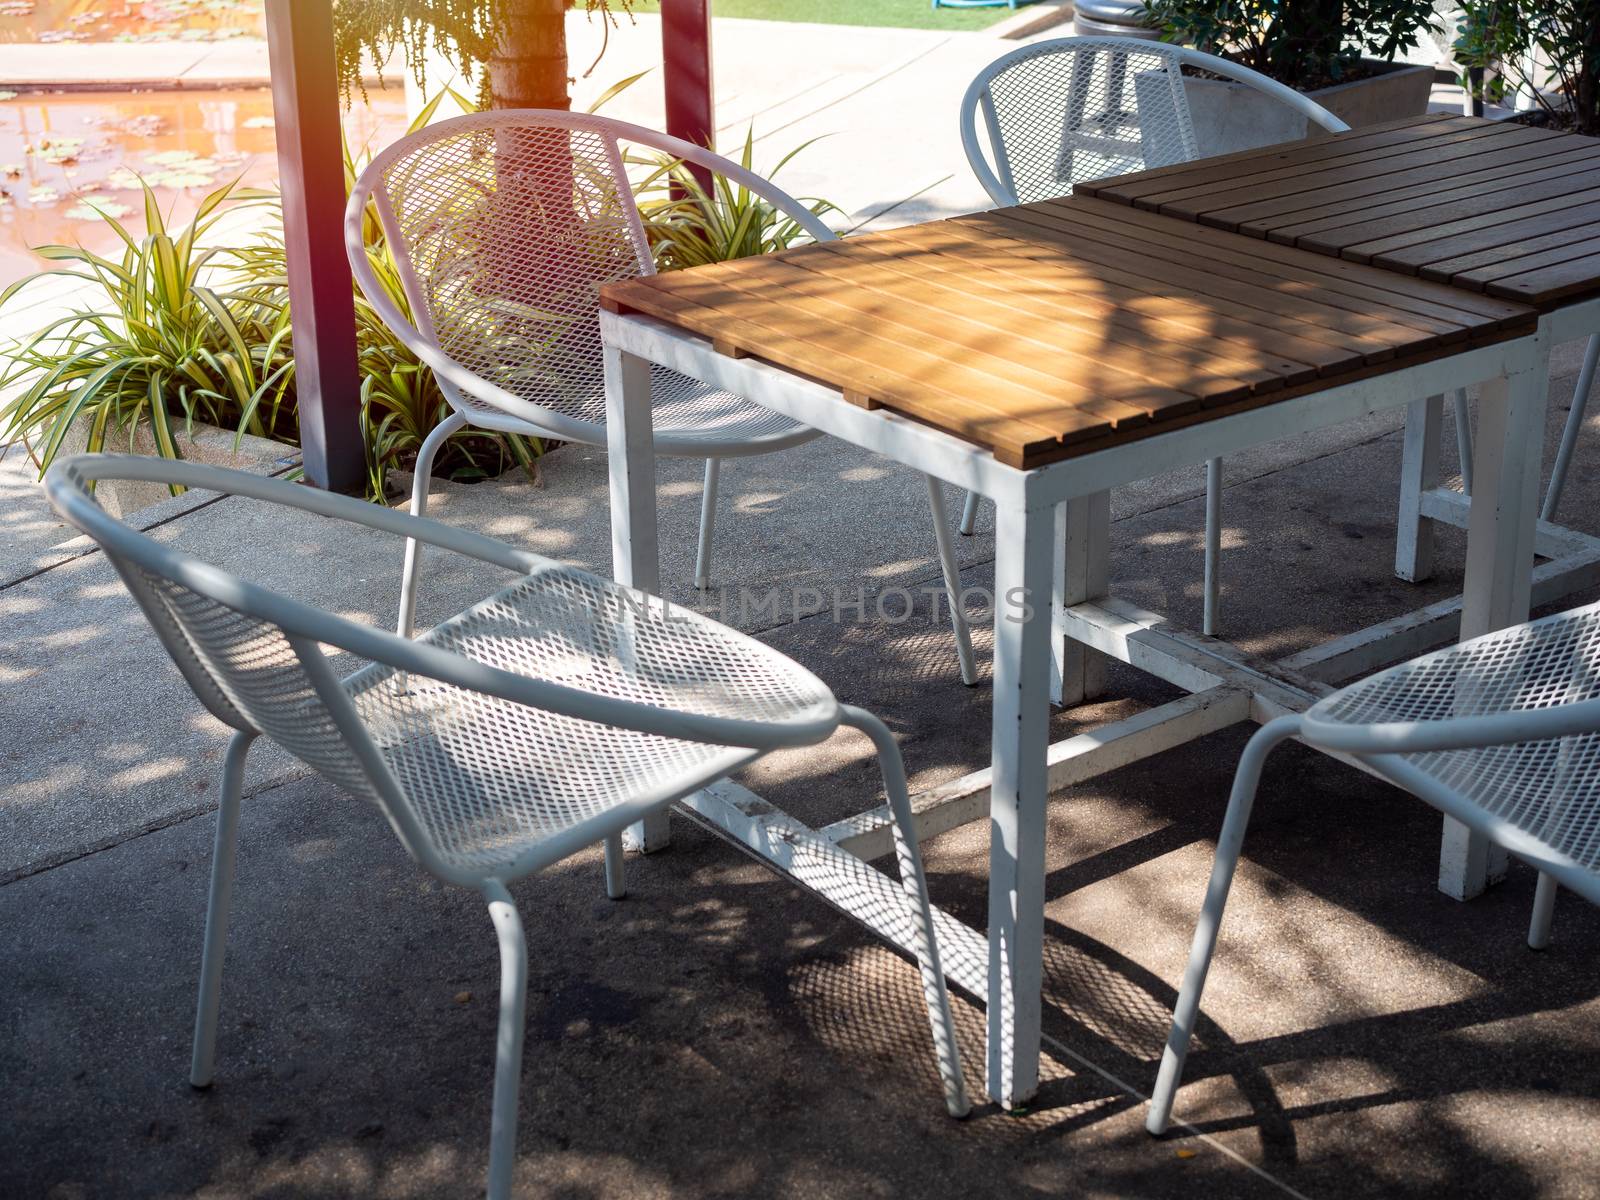 Wooden table and white retro style armchair in terrace. Shady place for relaxation.